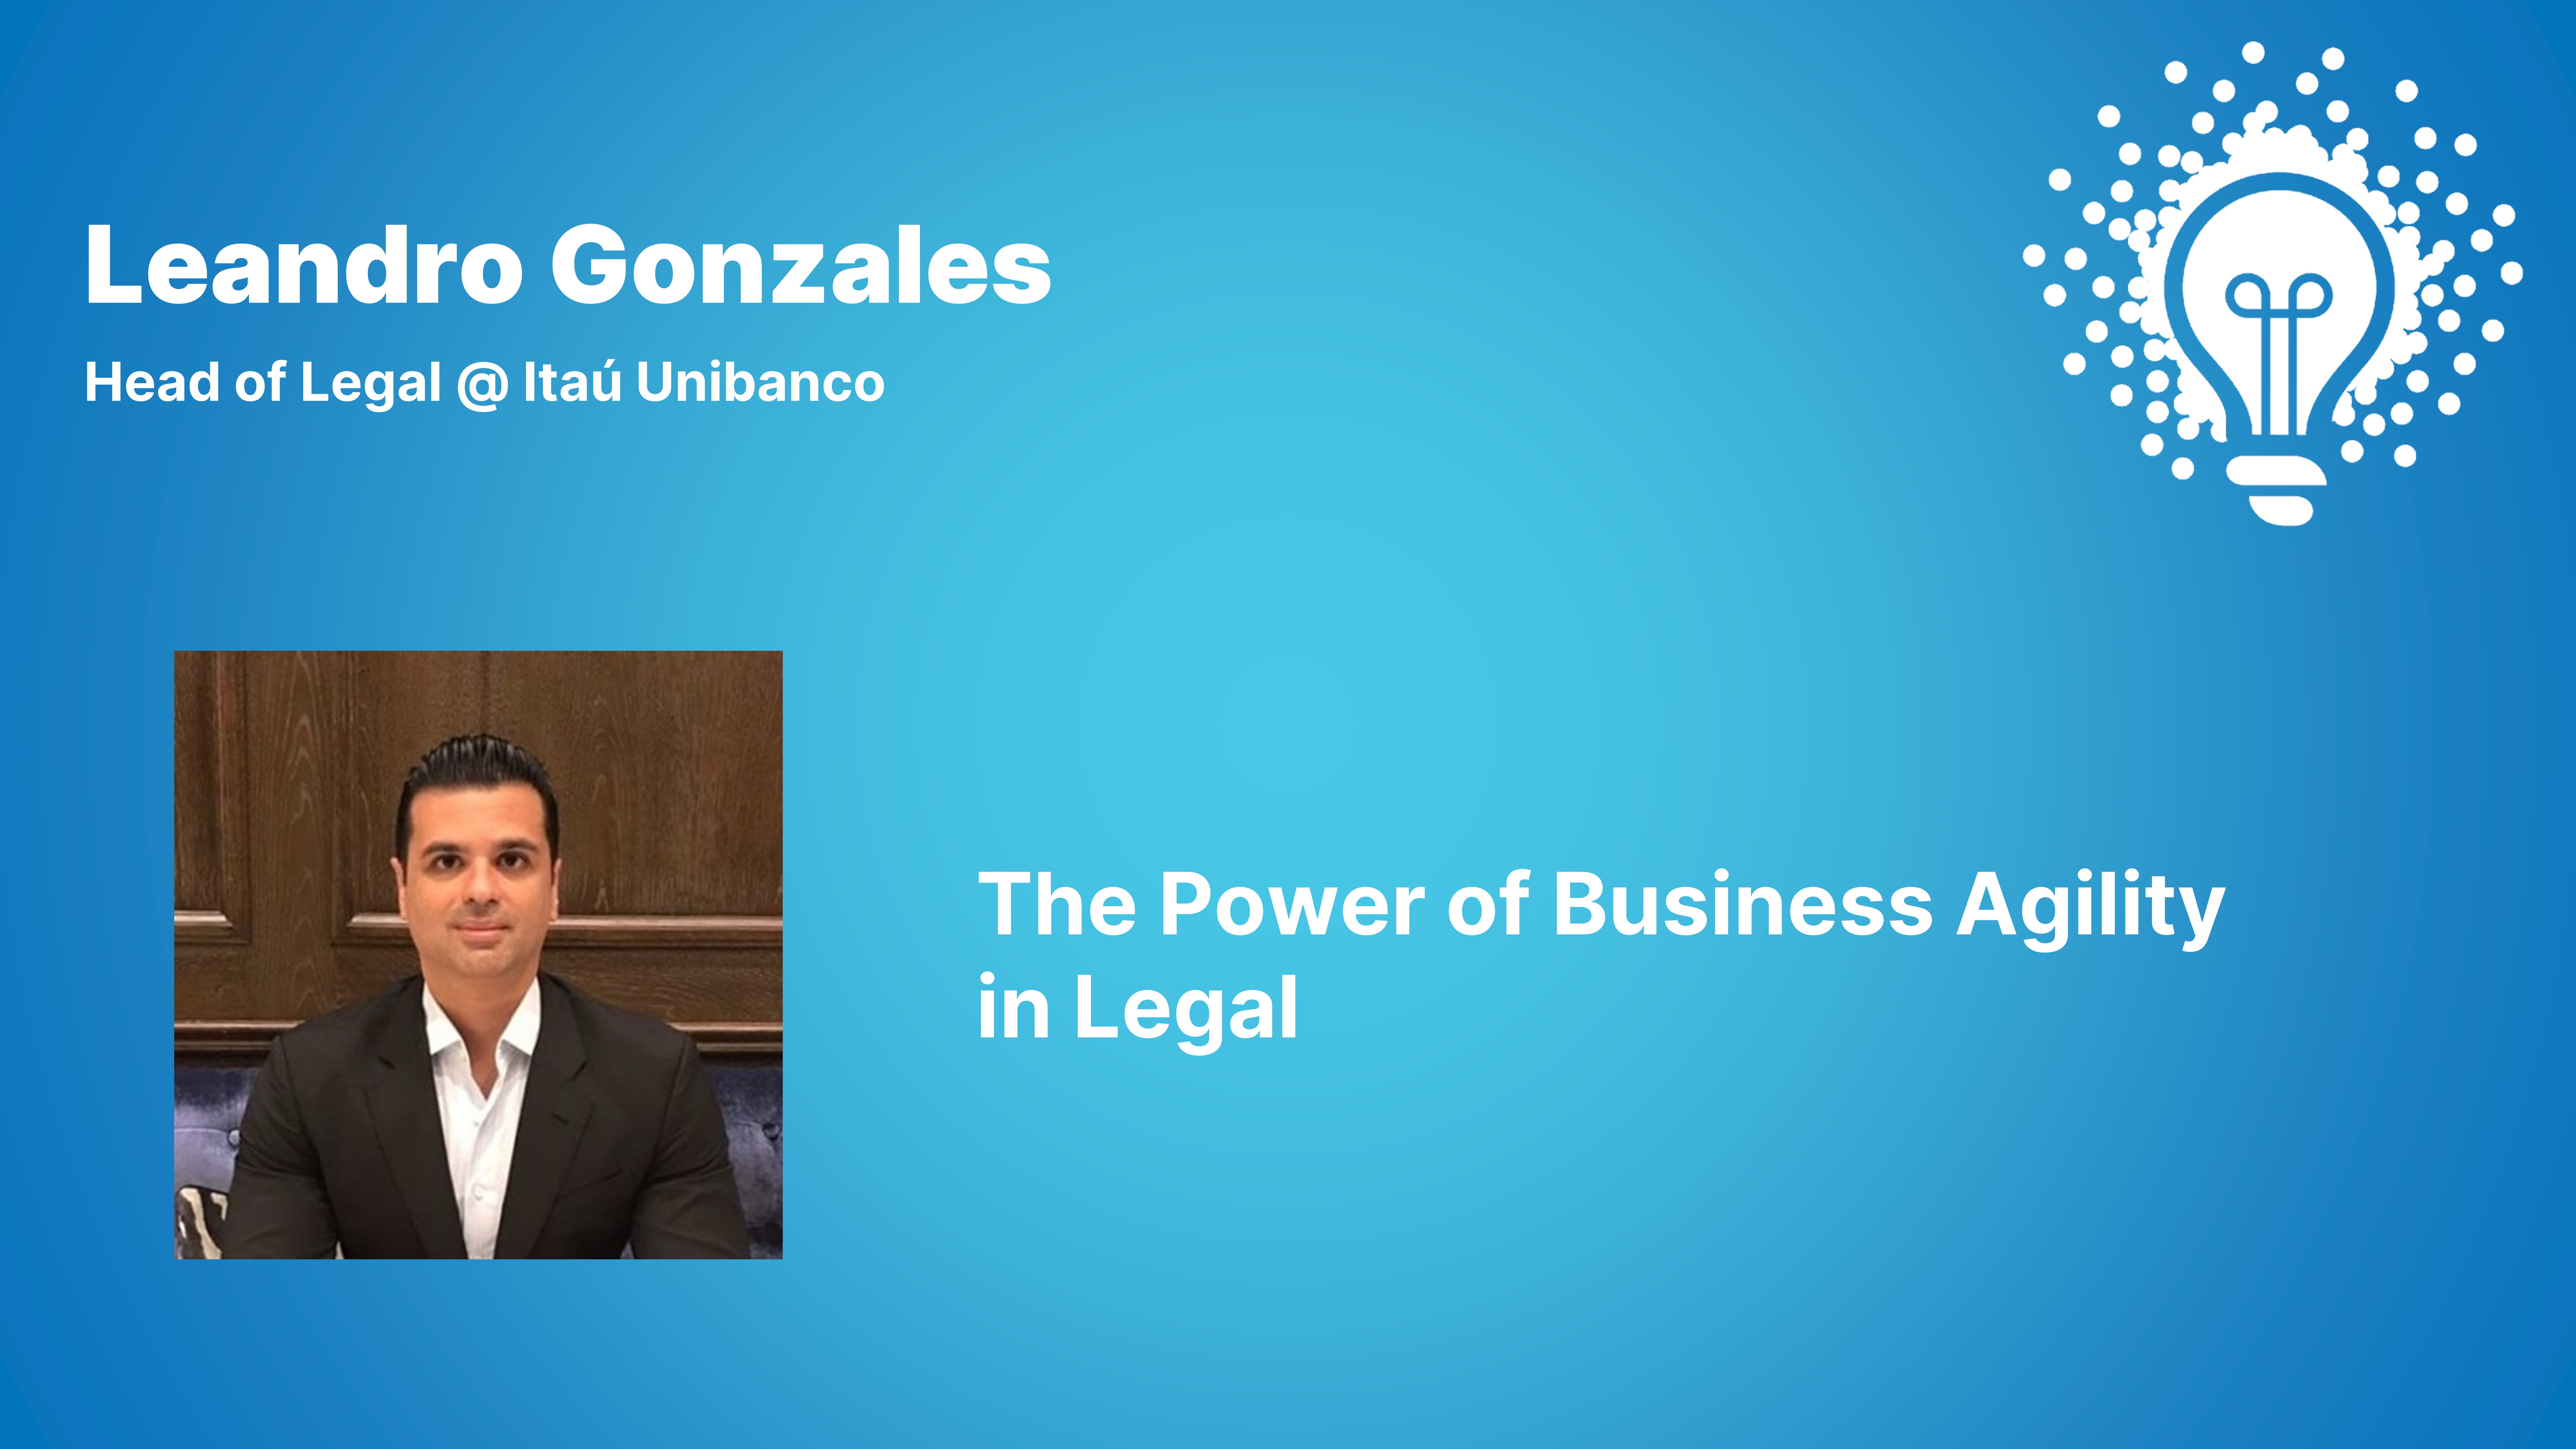 The Power of Business Agility in Legal